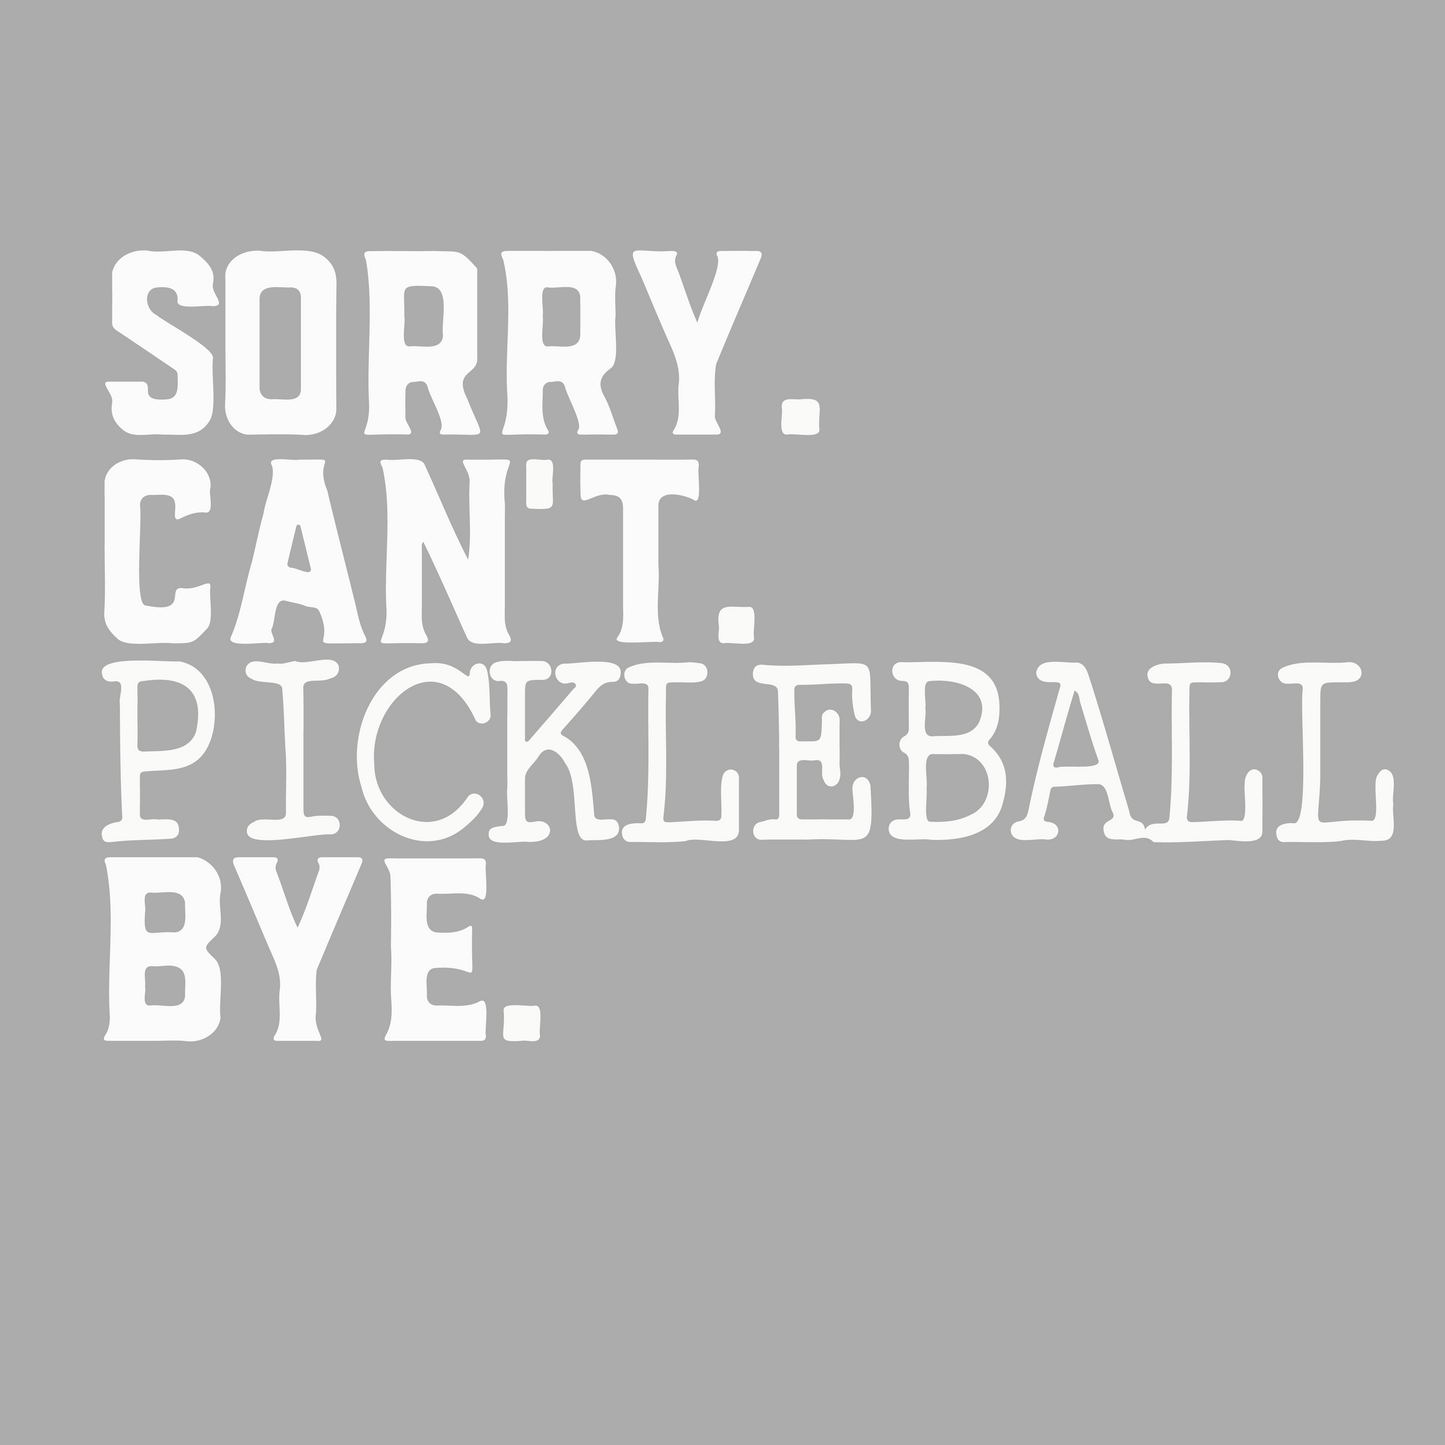 Sorry Can't Pickleball Bye | Unisex Hoodie Athletic Sweatshirt | 50% Cotton/50% Polyester